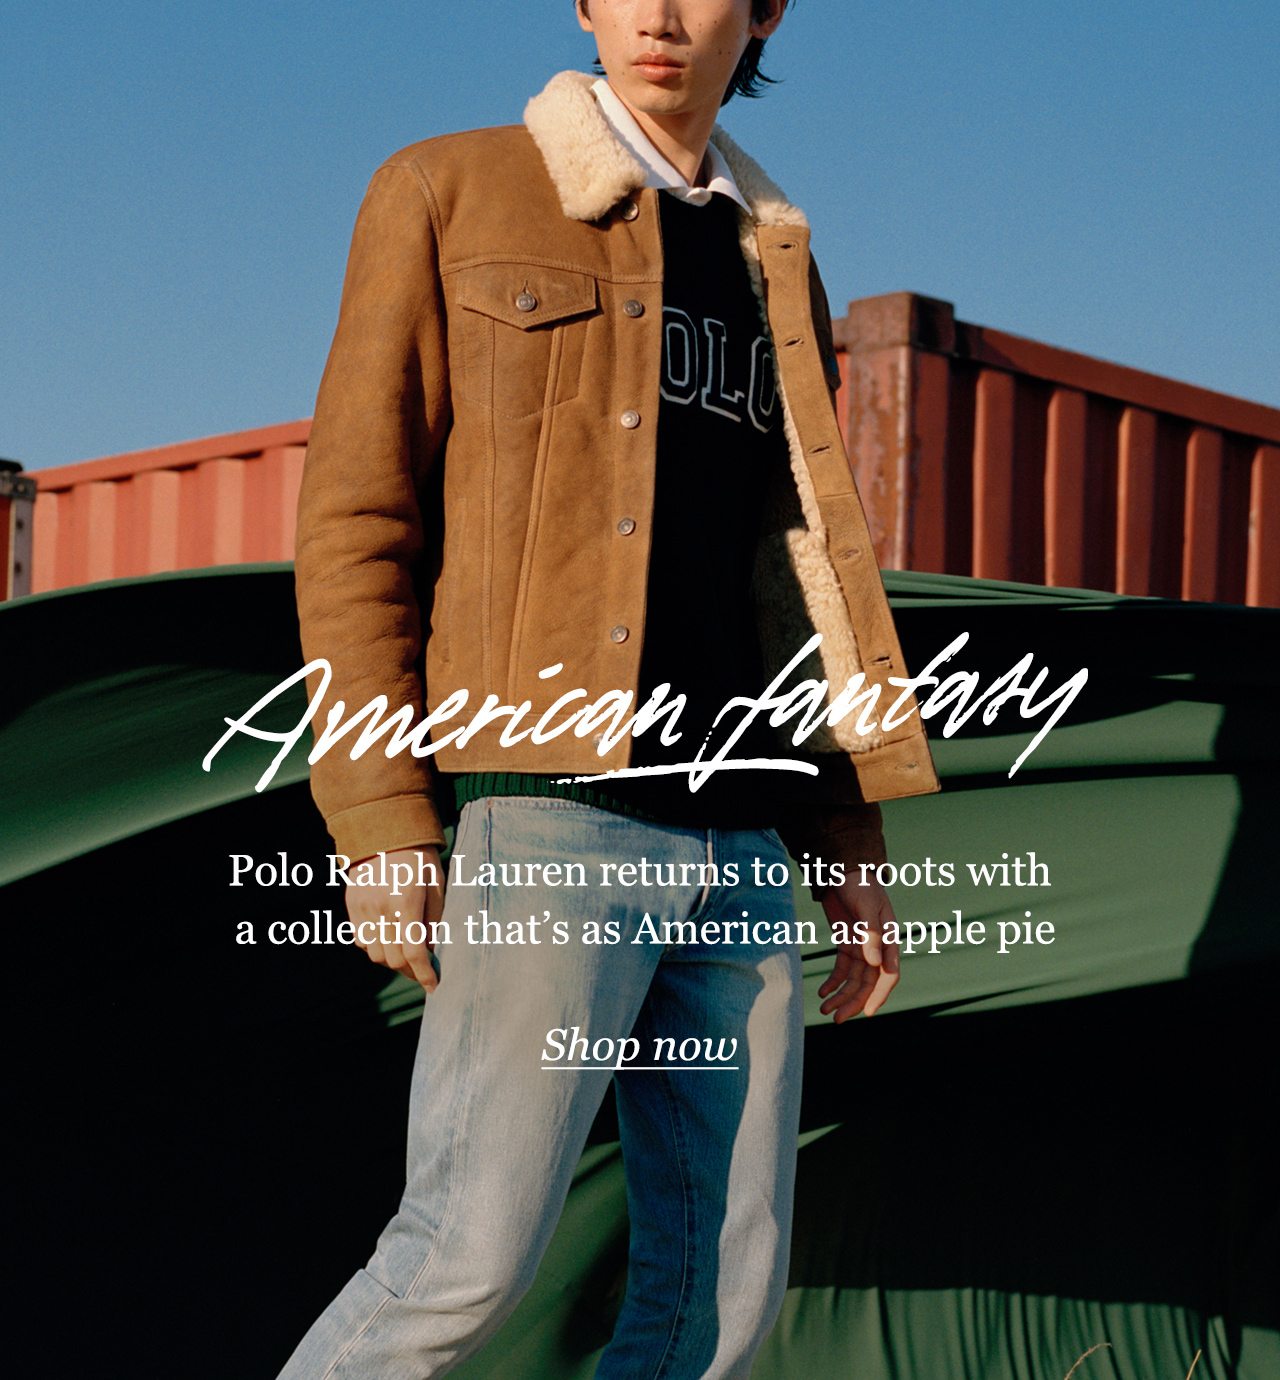 Polo Ralph Lauren returns to its roots with a collection that’s as American as apple pie